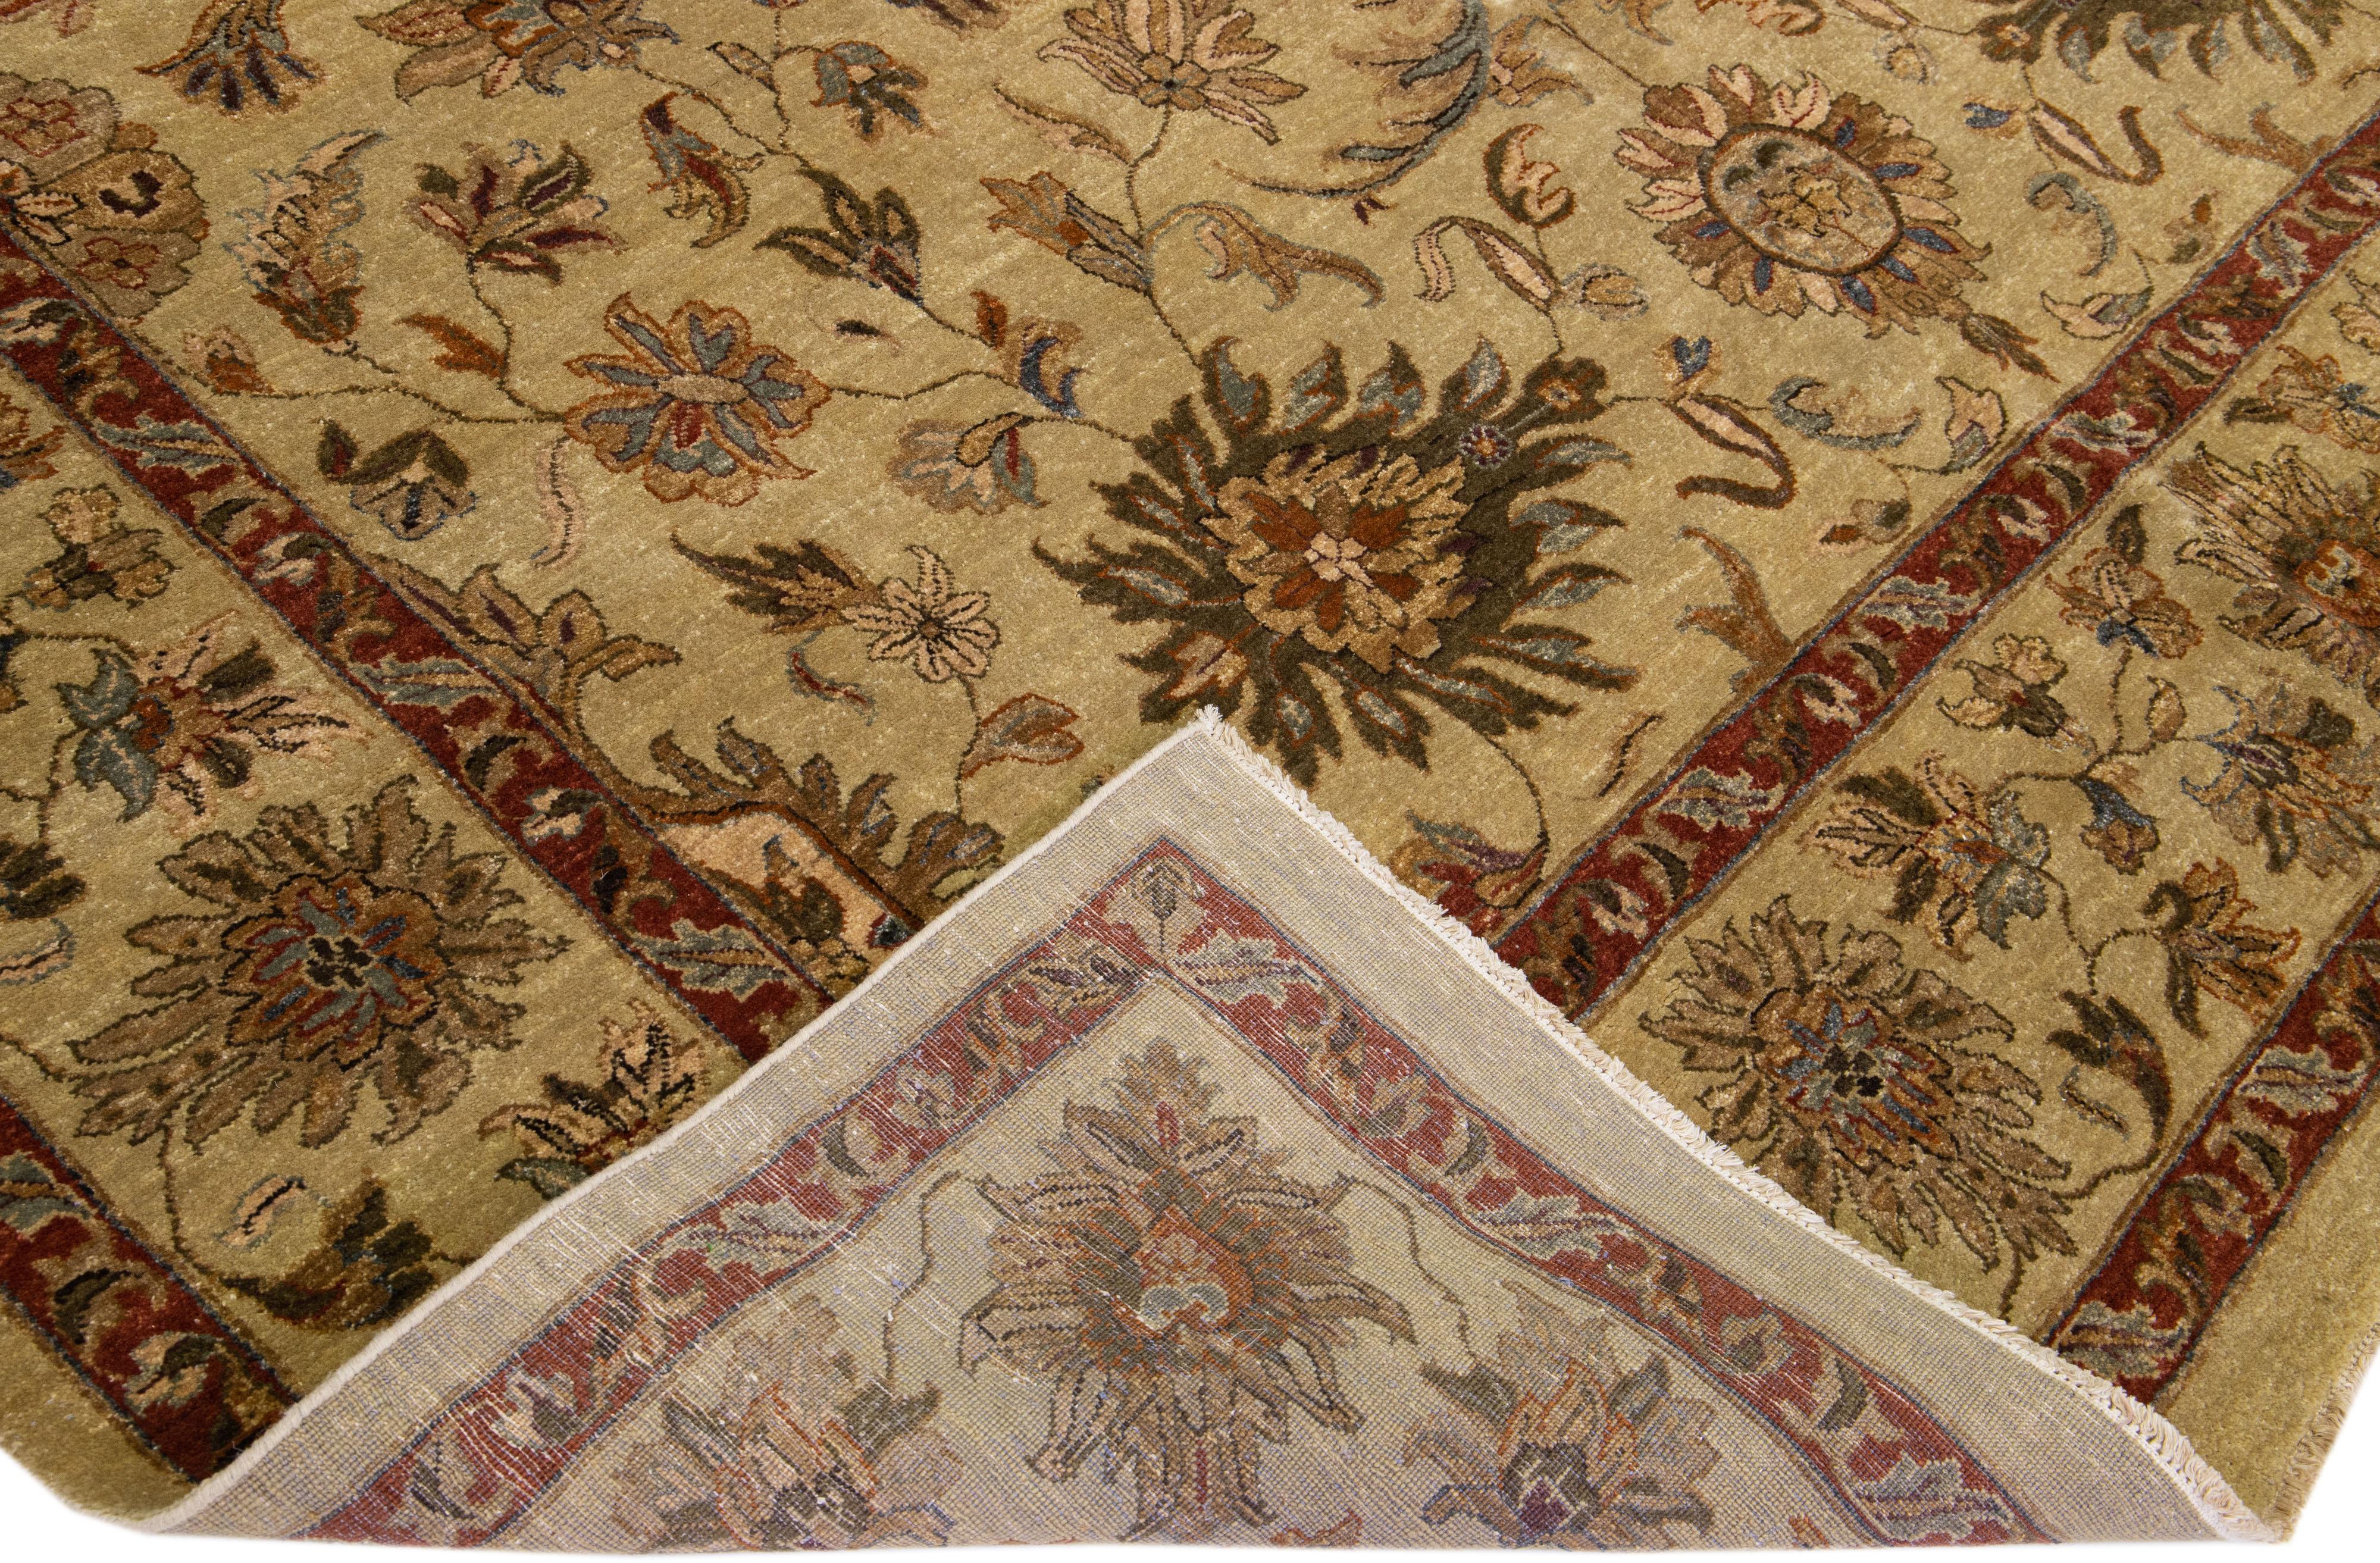 Beautiful antique Indian hand-knotted wool rug with a tan color field. This piece has a gorgeous floral design and a red, brown, and green accent.

This rug measures 10' x 14'.

Our rugs are professional cleaning before shipping.